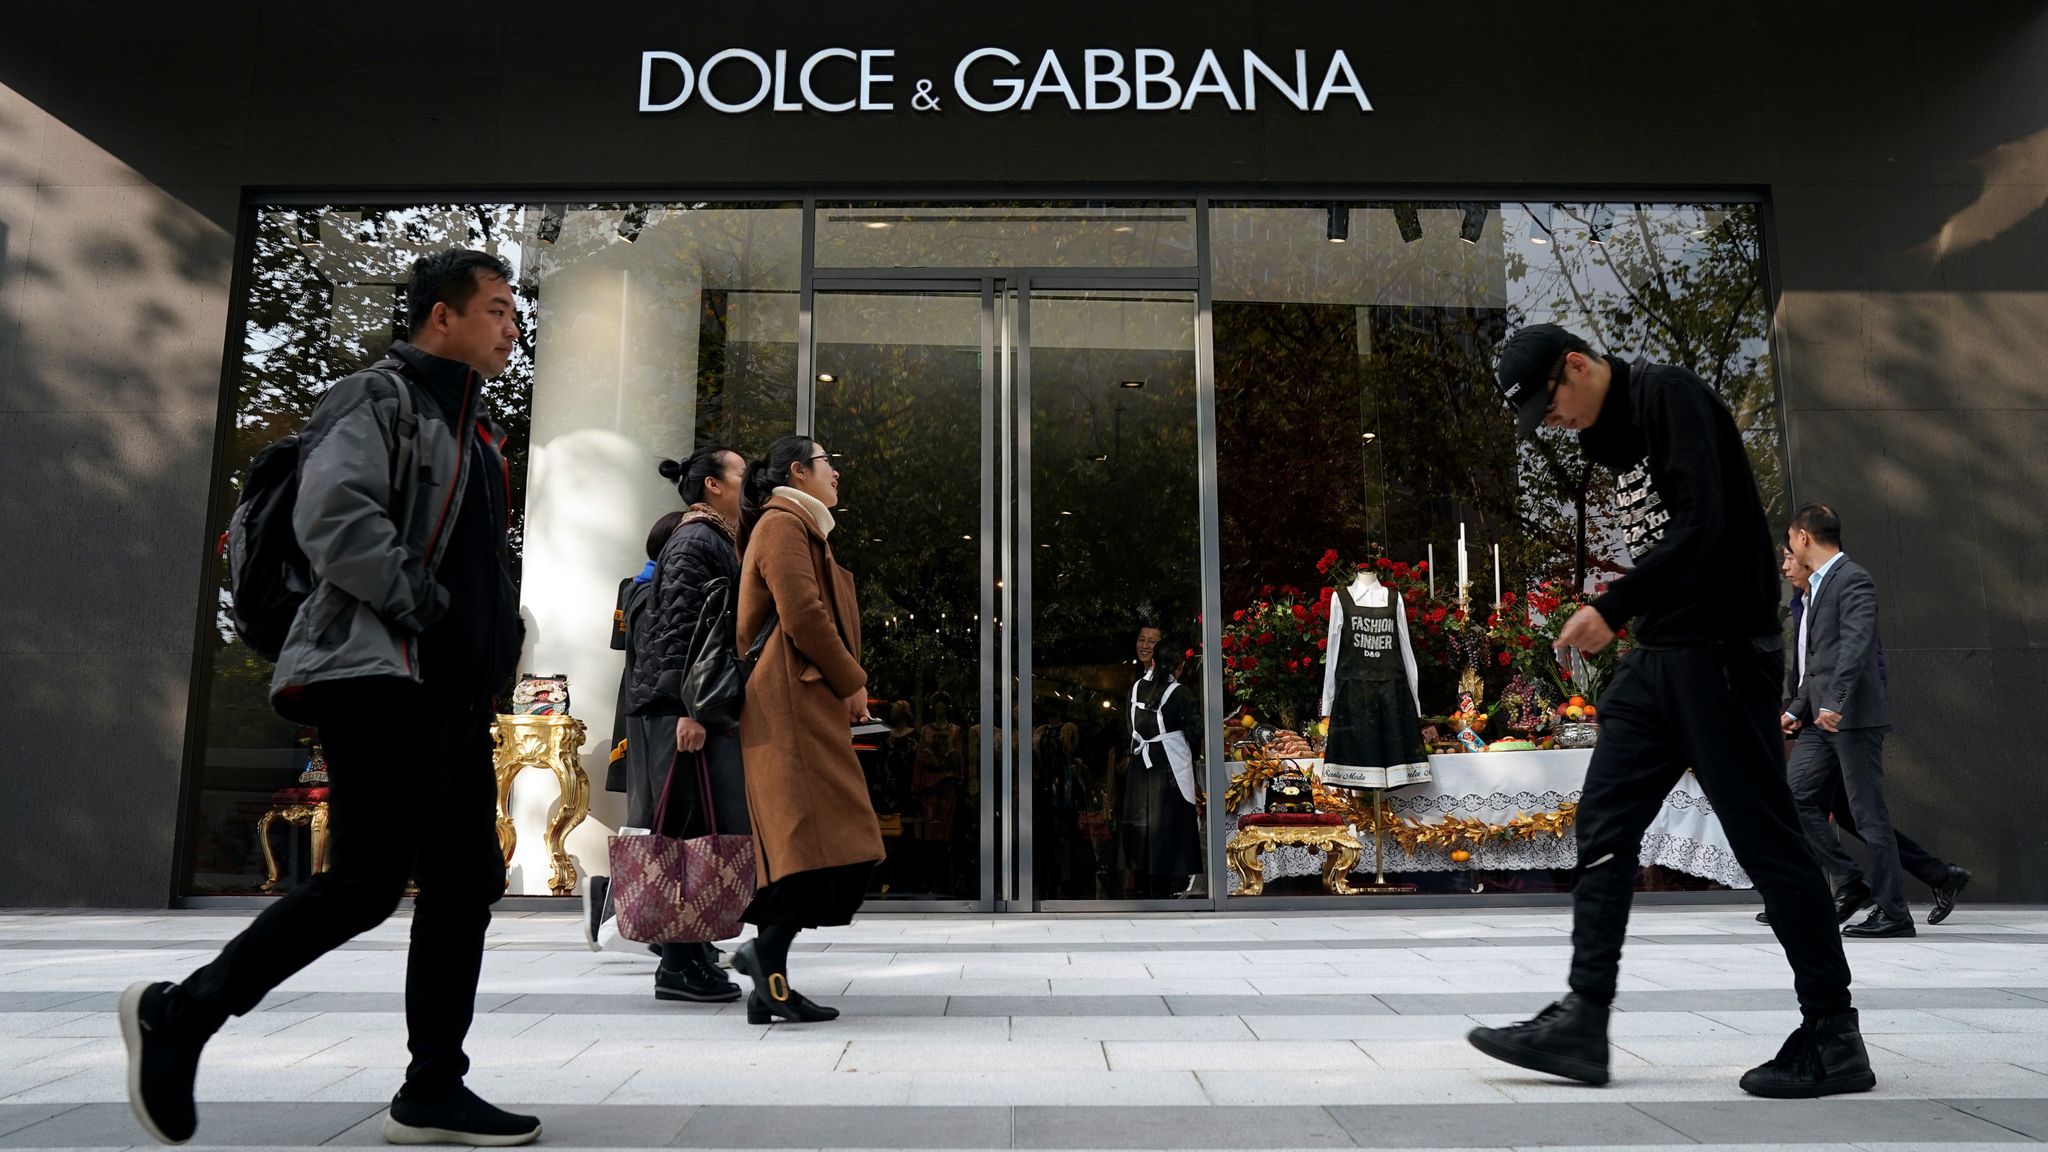 Dolce and Gabbana files multimillion-pound lawsuit against bloggers after  backlash over alleged anti-Asian comments | Business News | Sky News